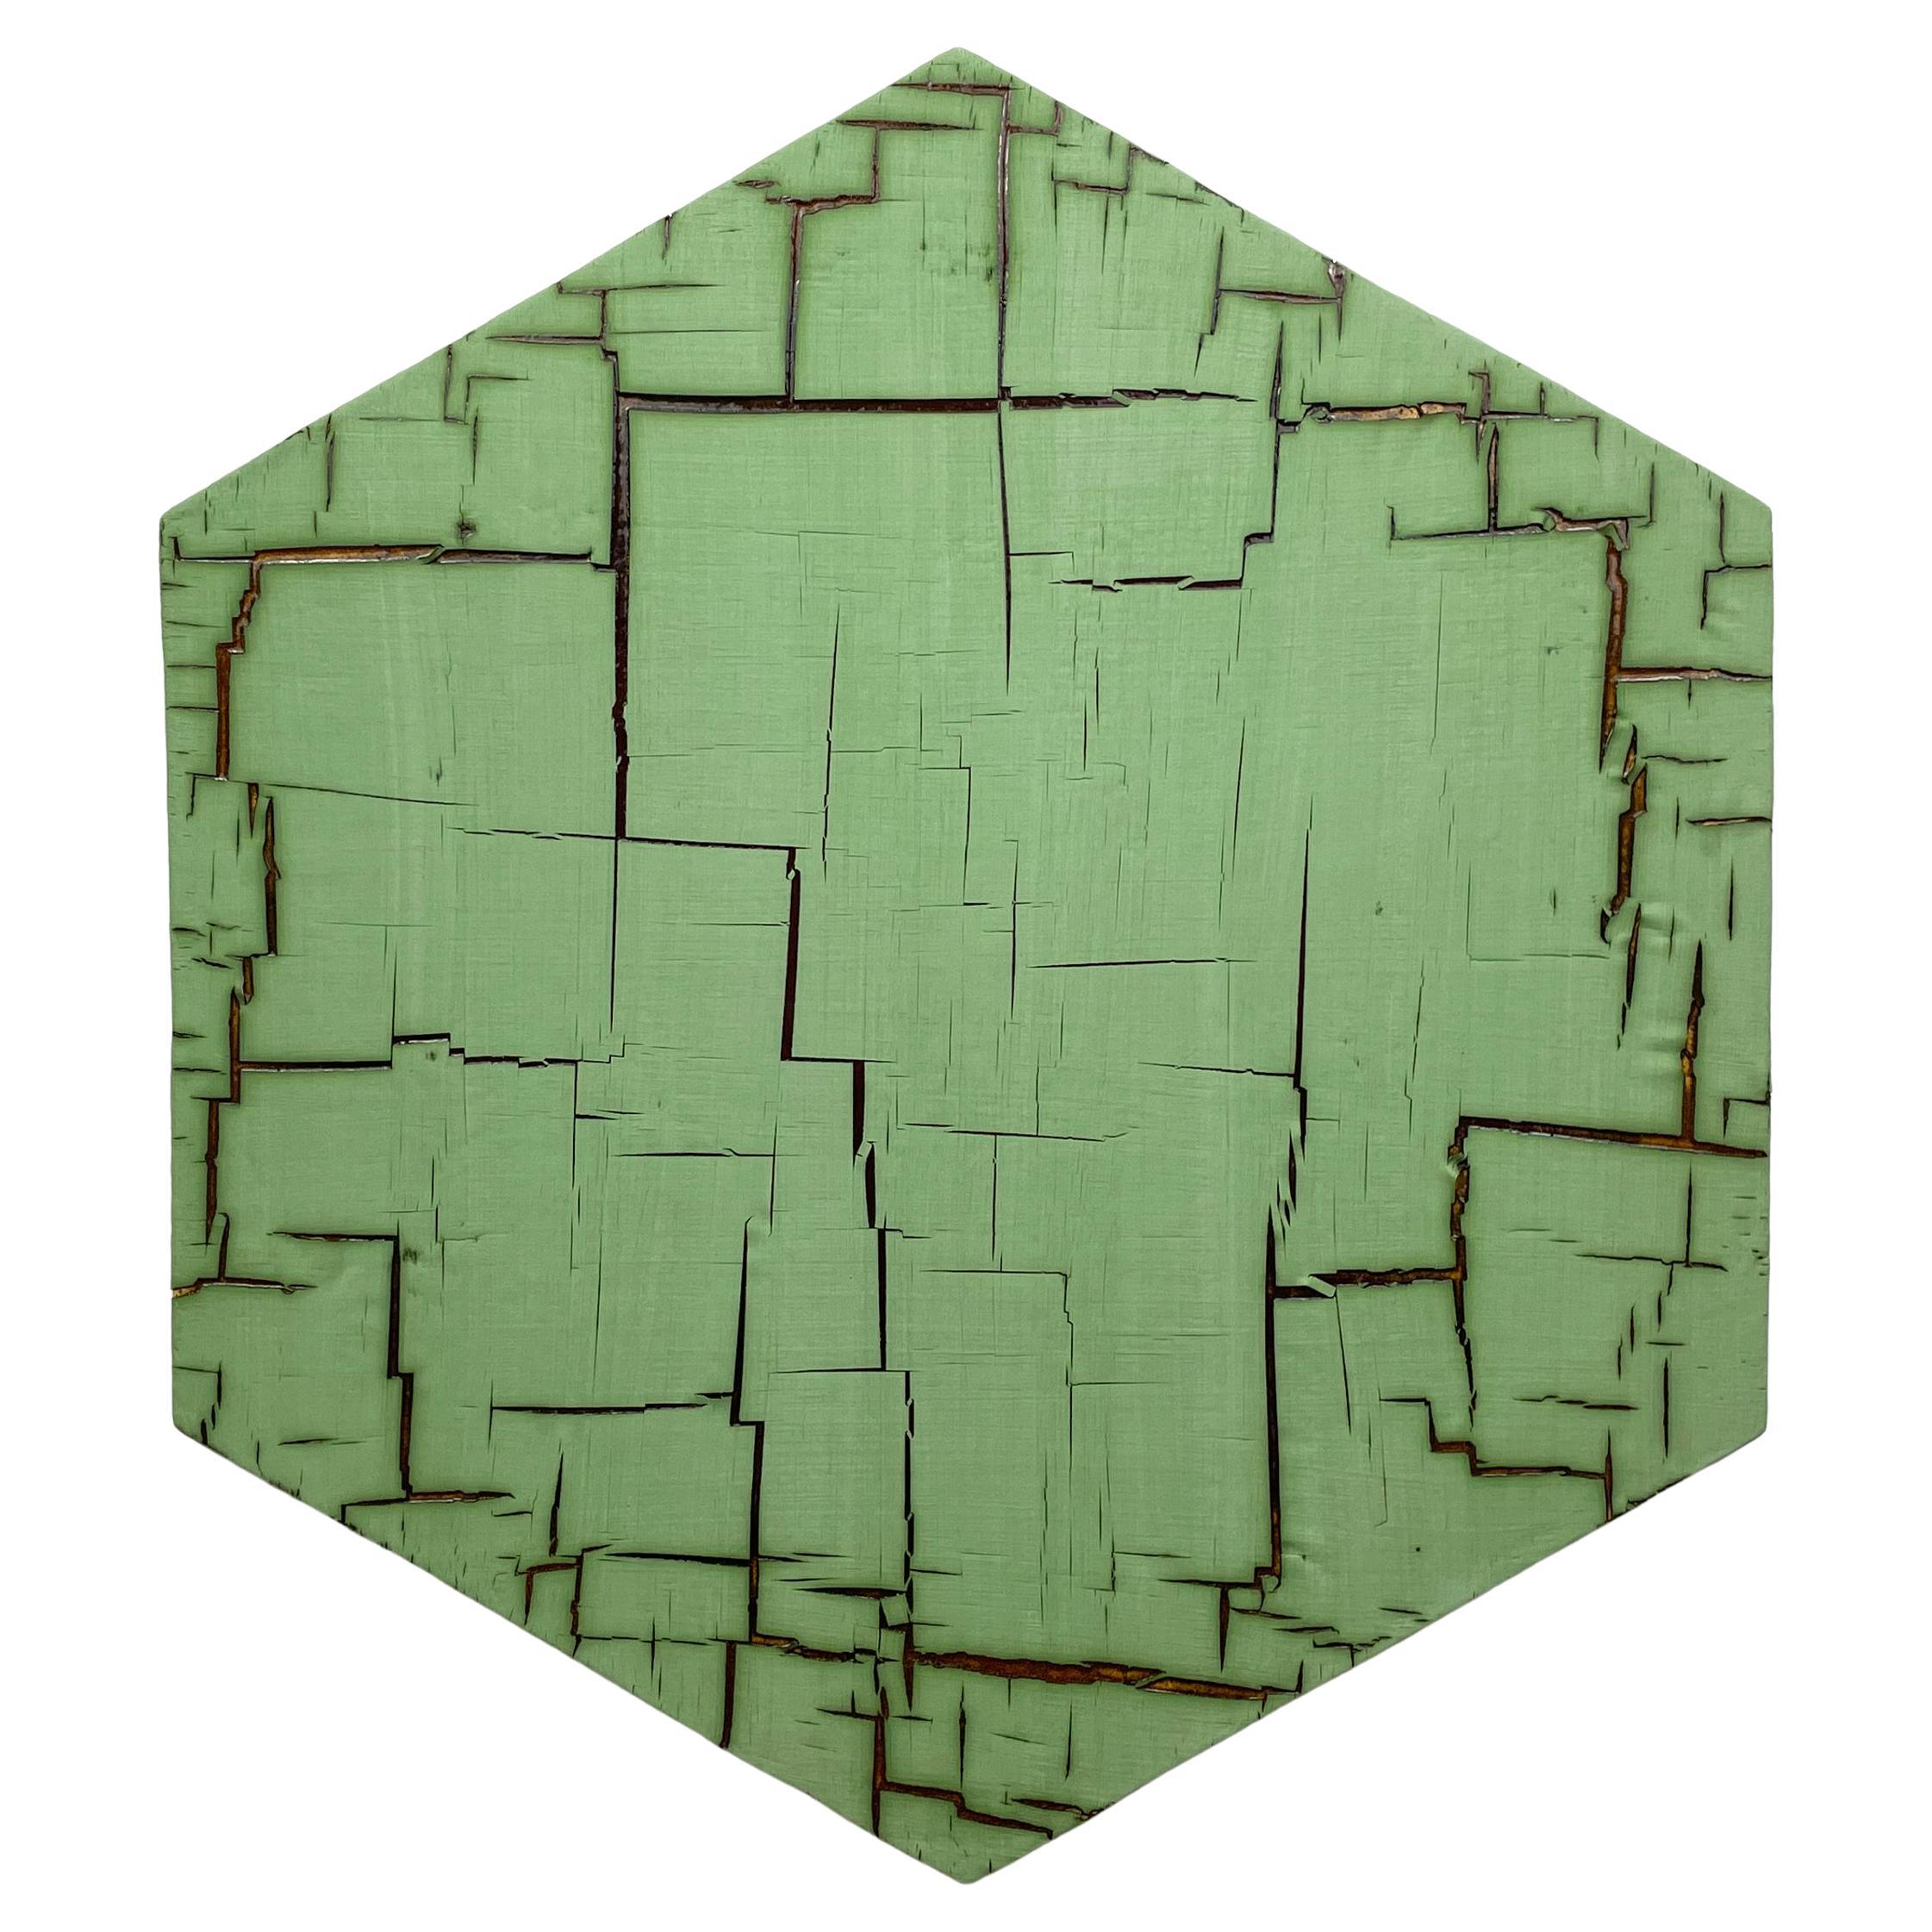 Green Matrix - Ceramic wall art by William Edwards For Sale